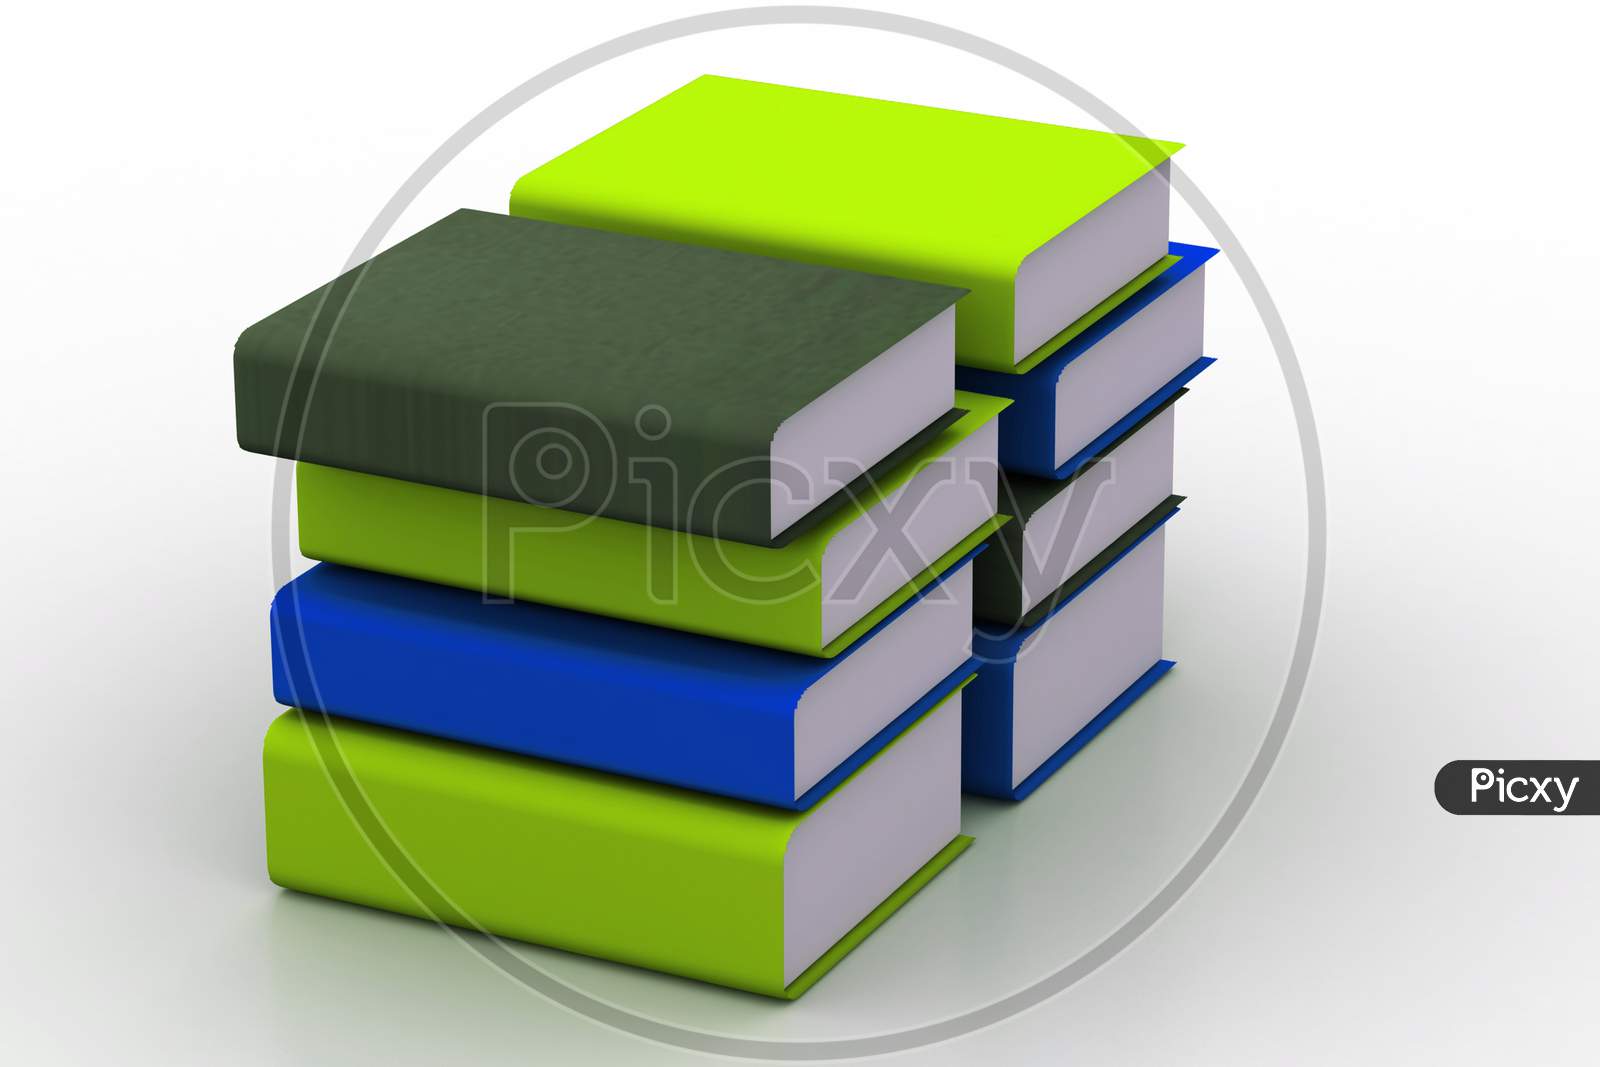 Two sets of Books on White Background